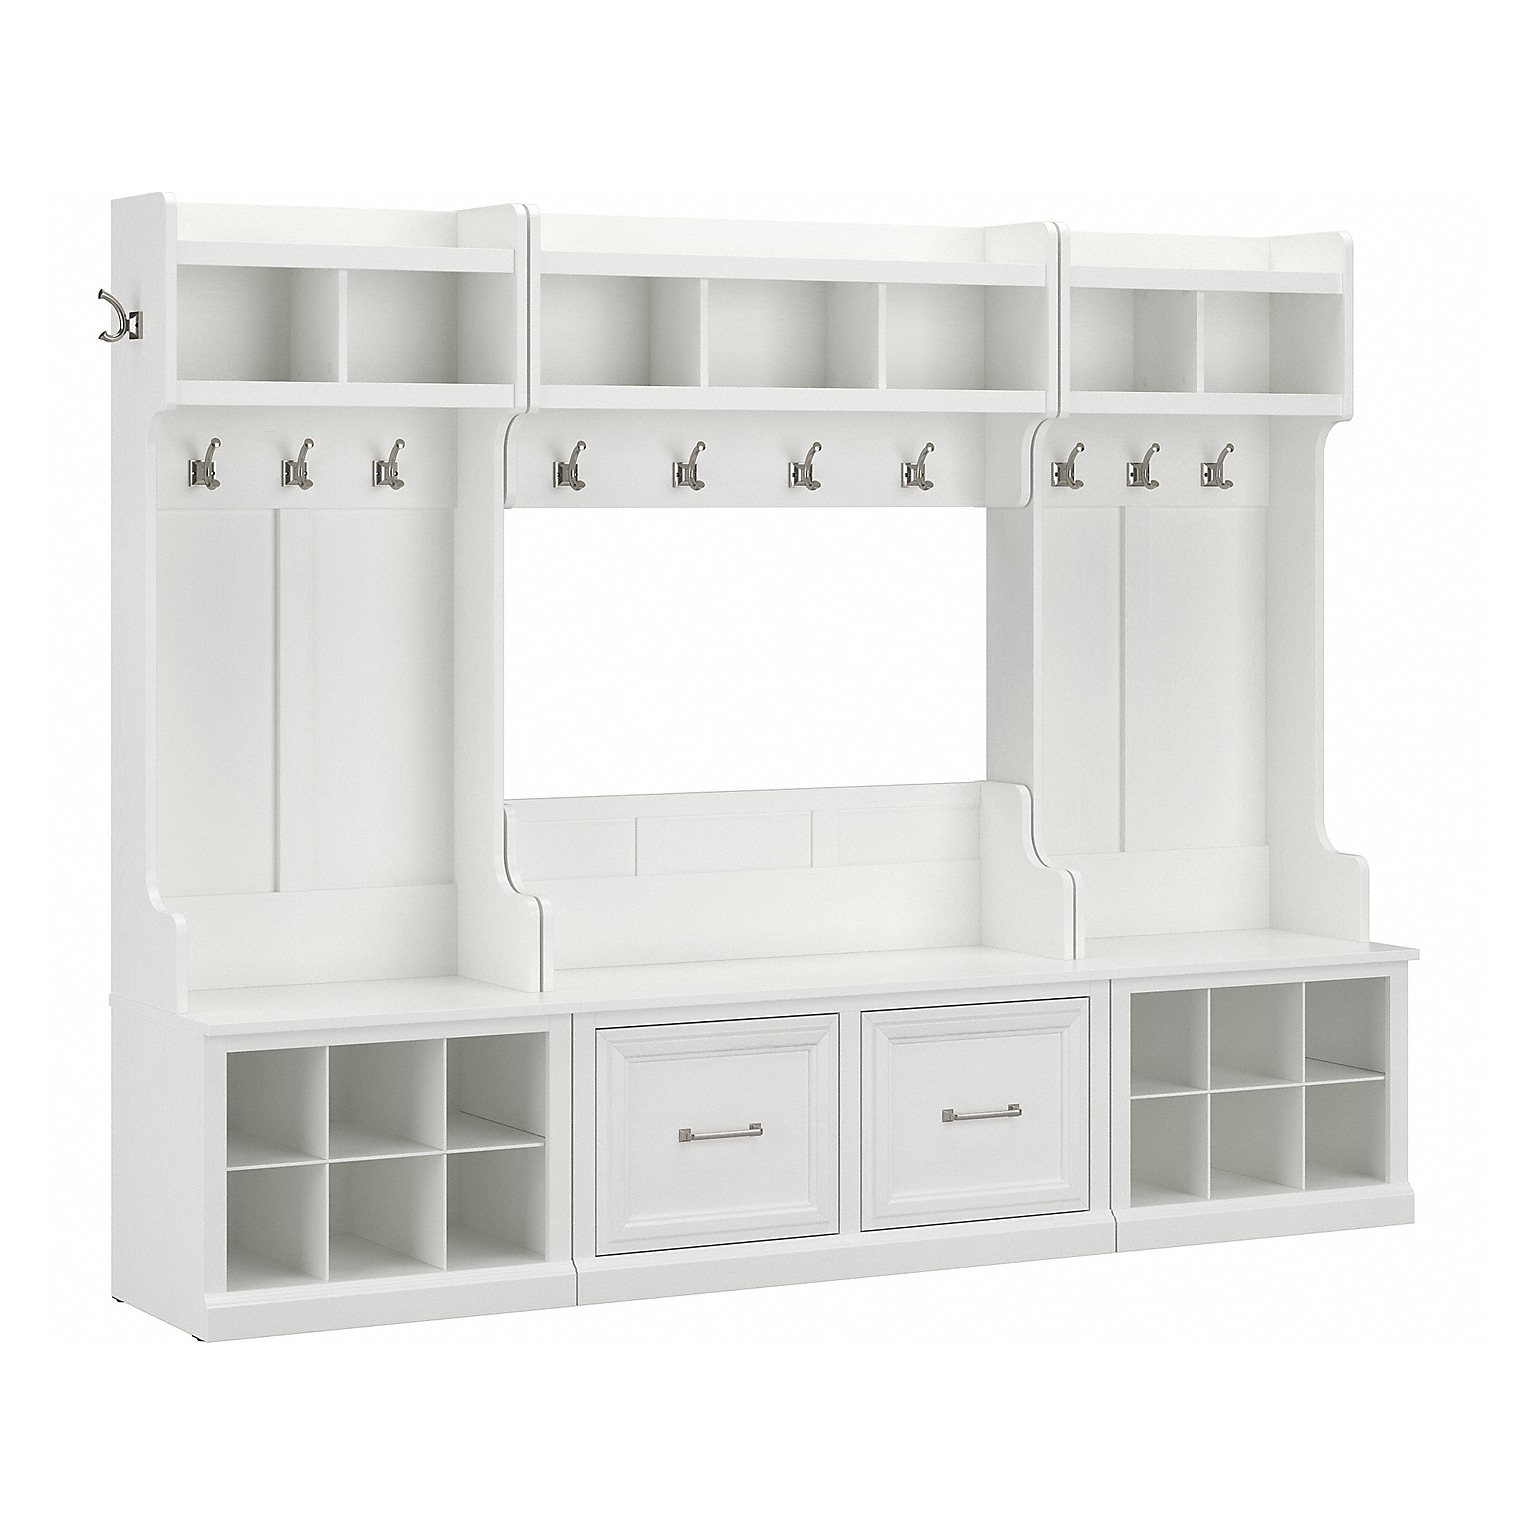 Bush Furniture Woodland Full Entryway Storage Set with Coat Rack and Shoe Bench with Doors, White Ash (WDL013WAS)